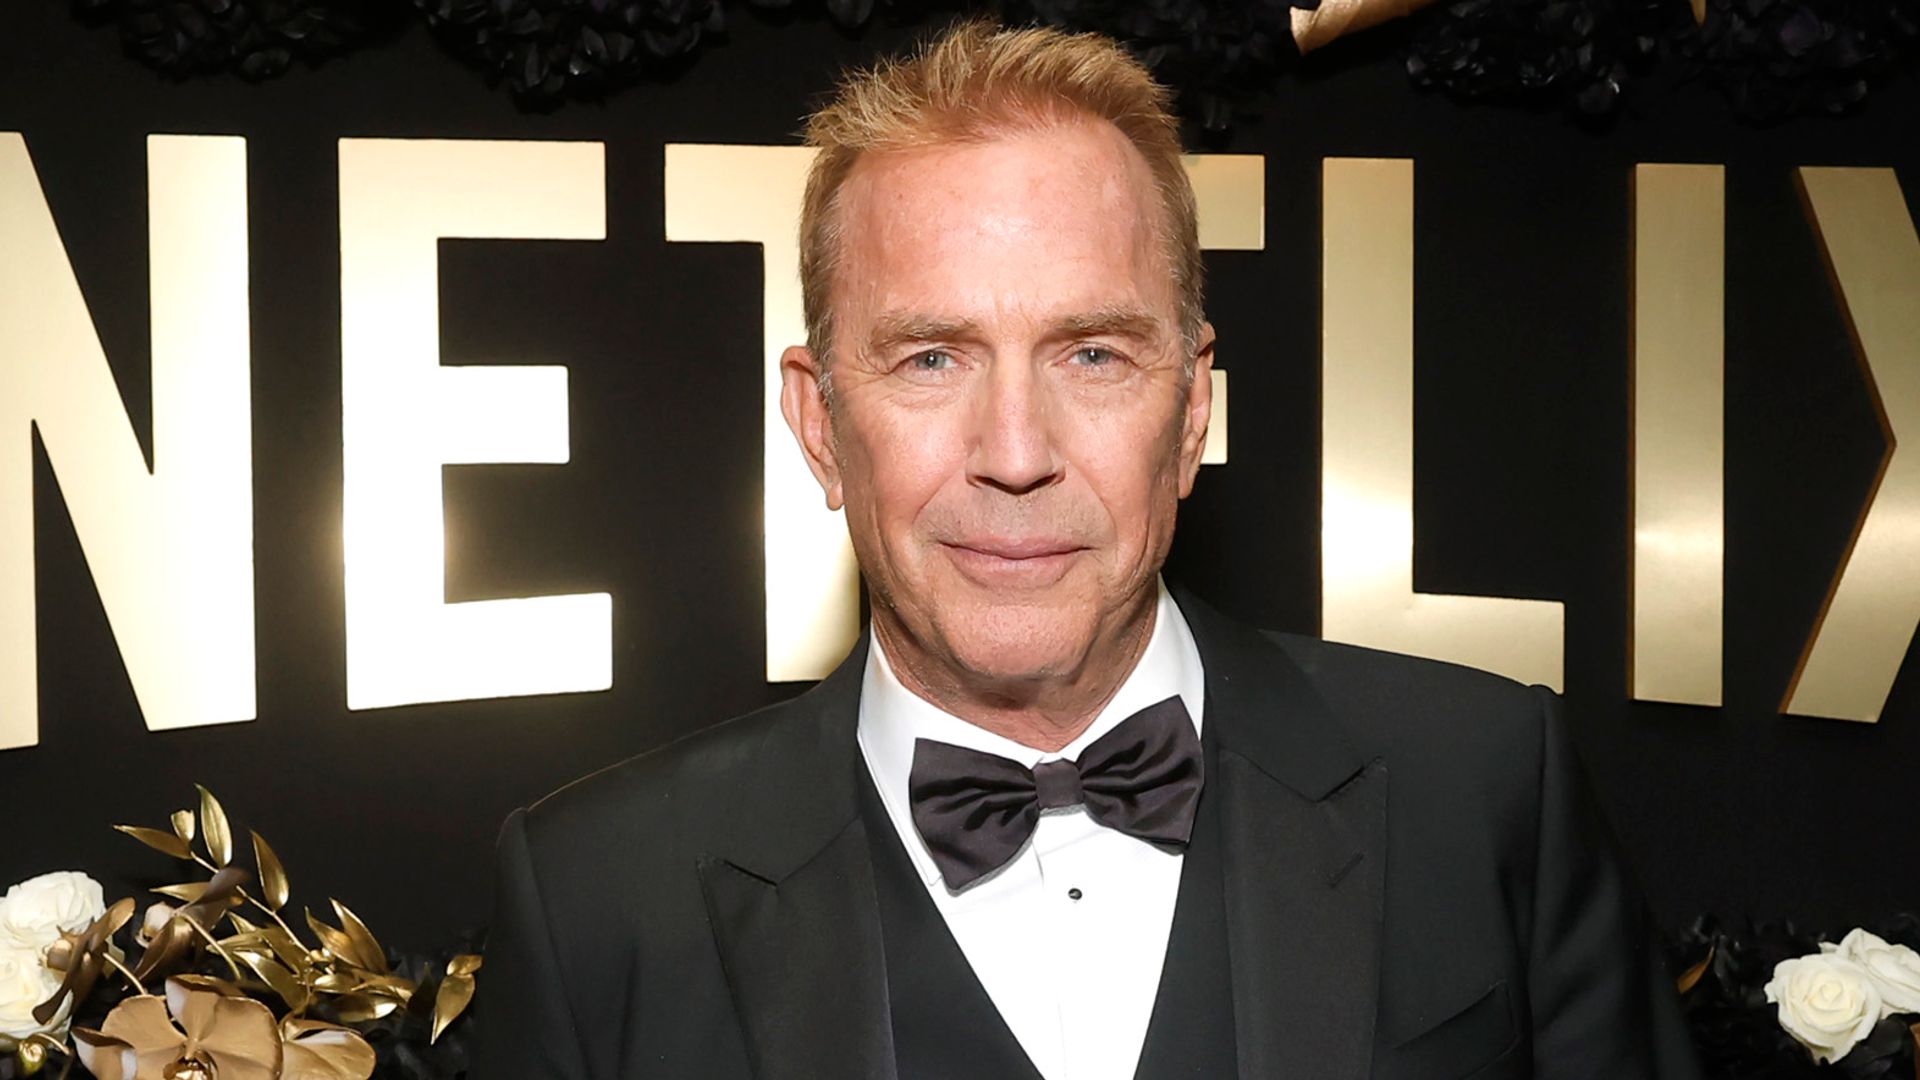 Kevin Costner debuts major new look you need to see for solo Cannes appearance